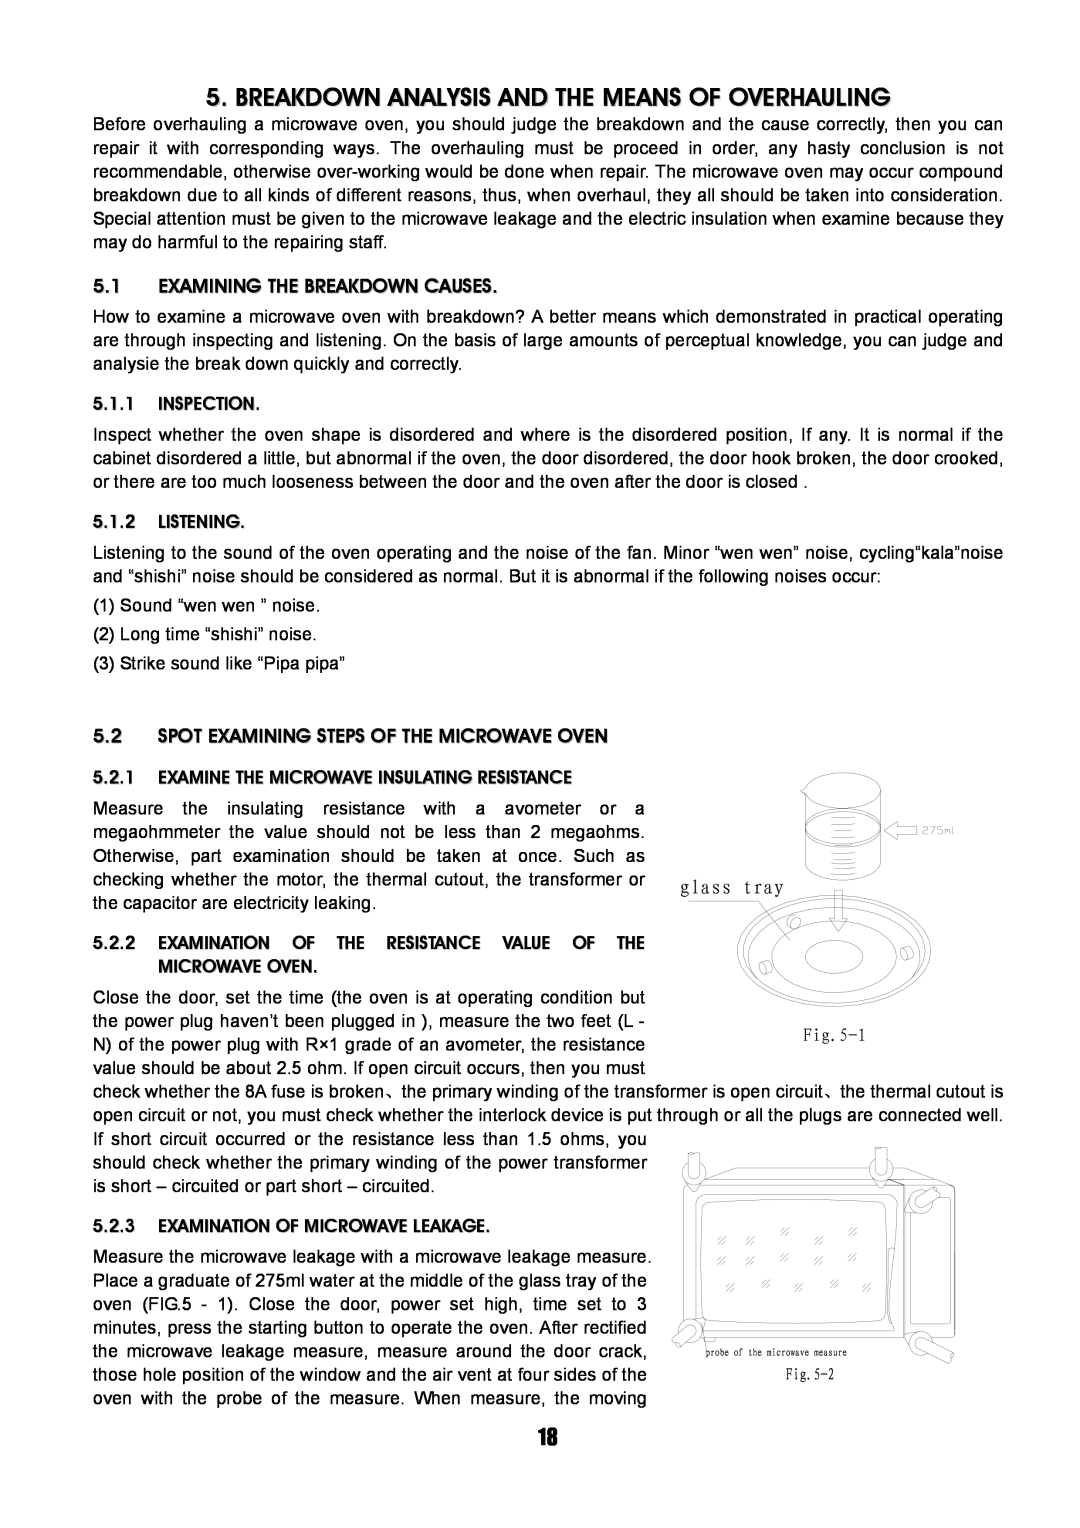 Sanyo SM-GA0005 service manual 5.1EXAMINING THE BREAKDOWN CAUSES, Spot Examining Steps Of The Microwave Oven 